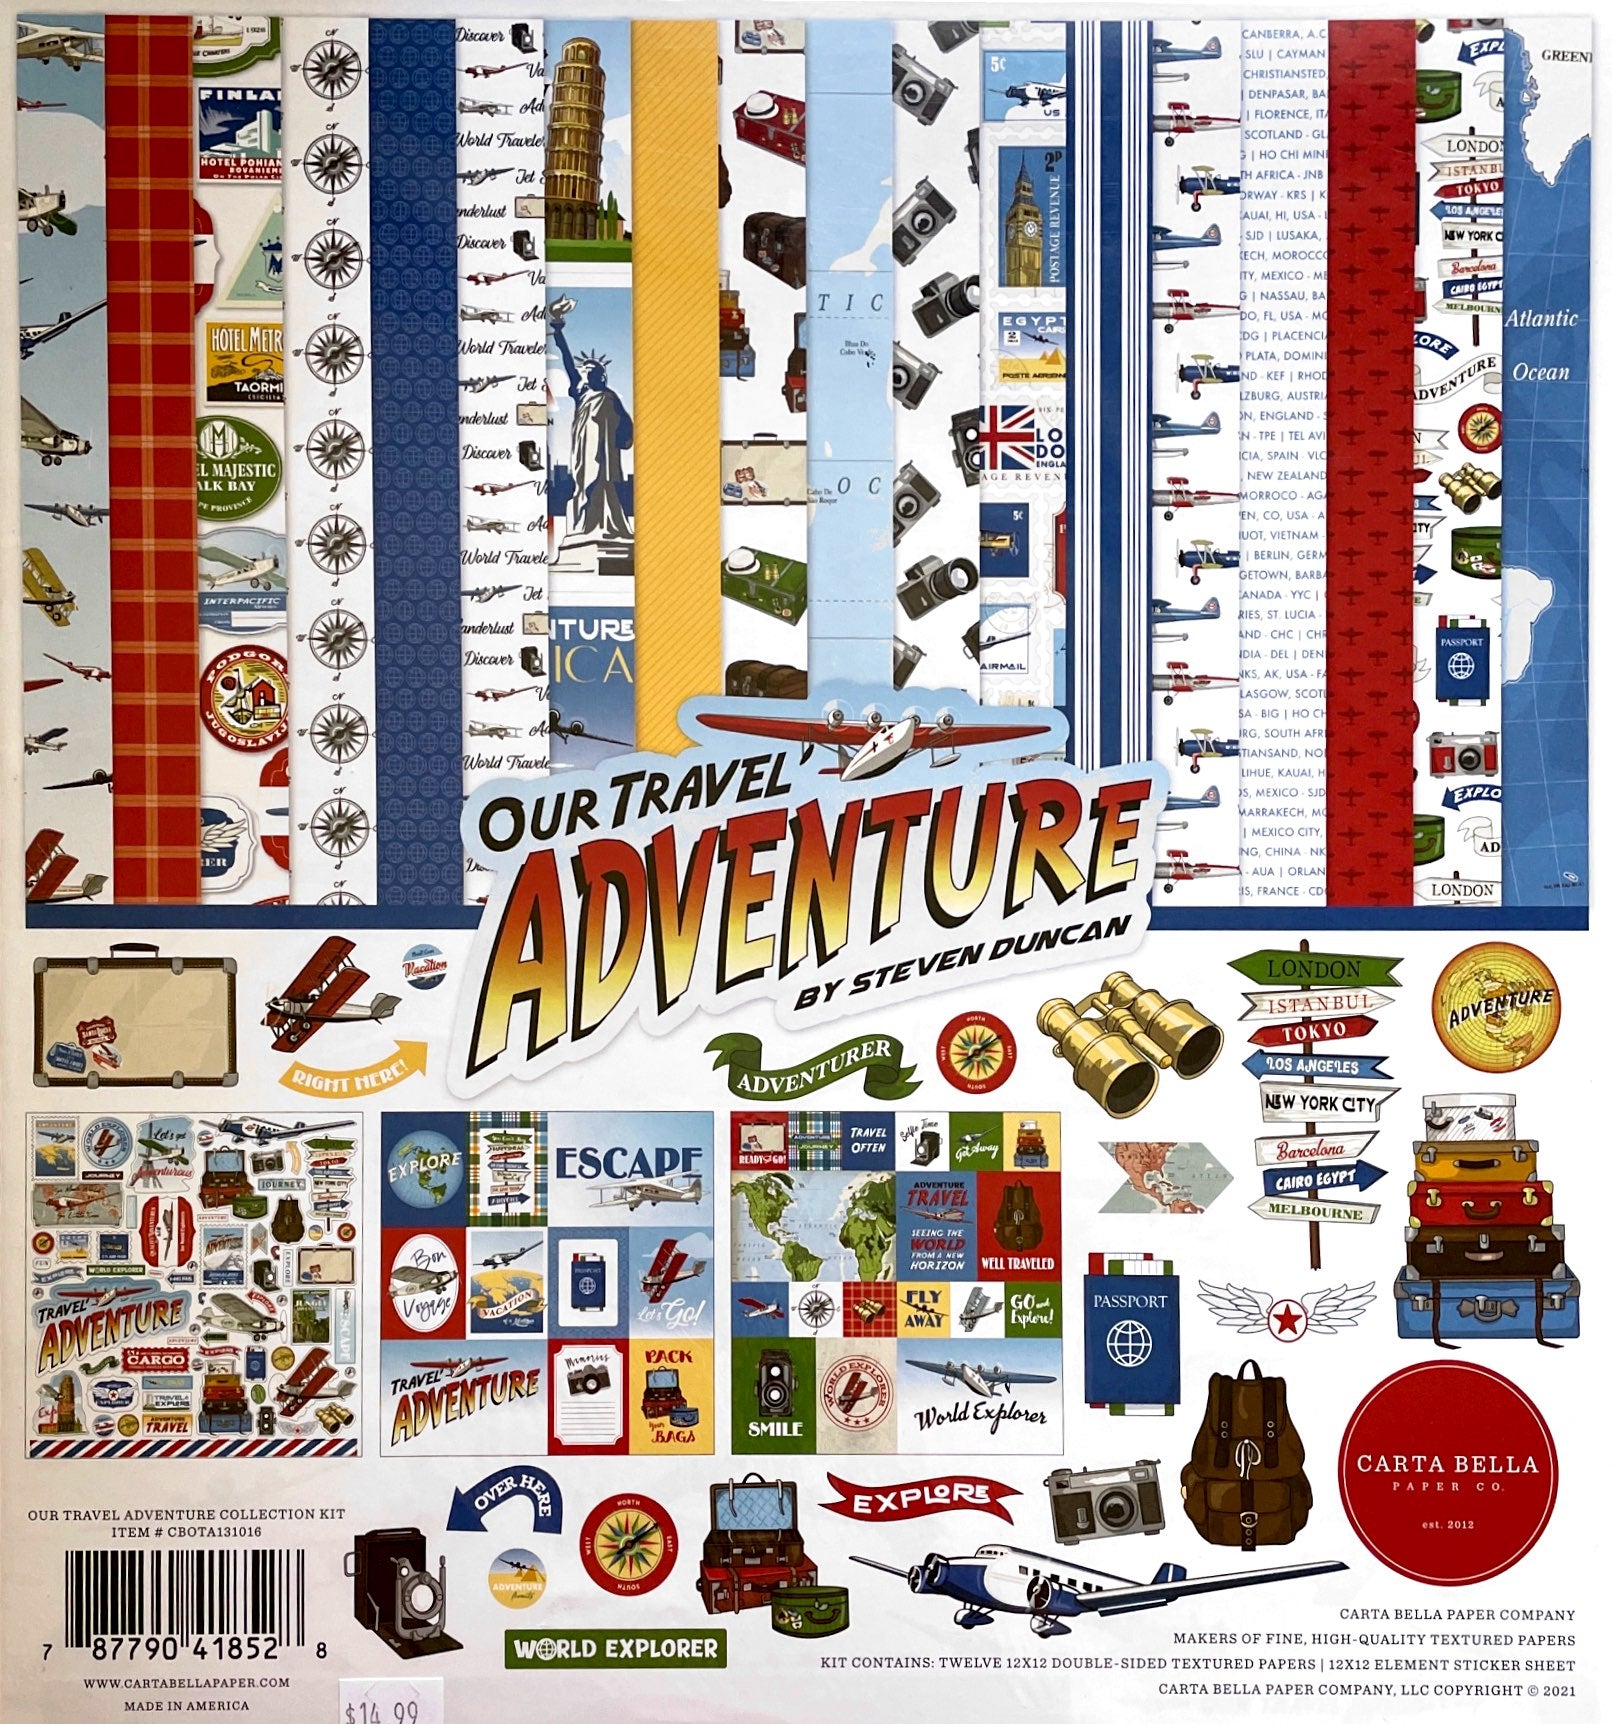 Our Travel Adventure Collection Kit